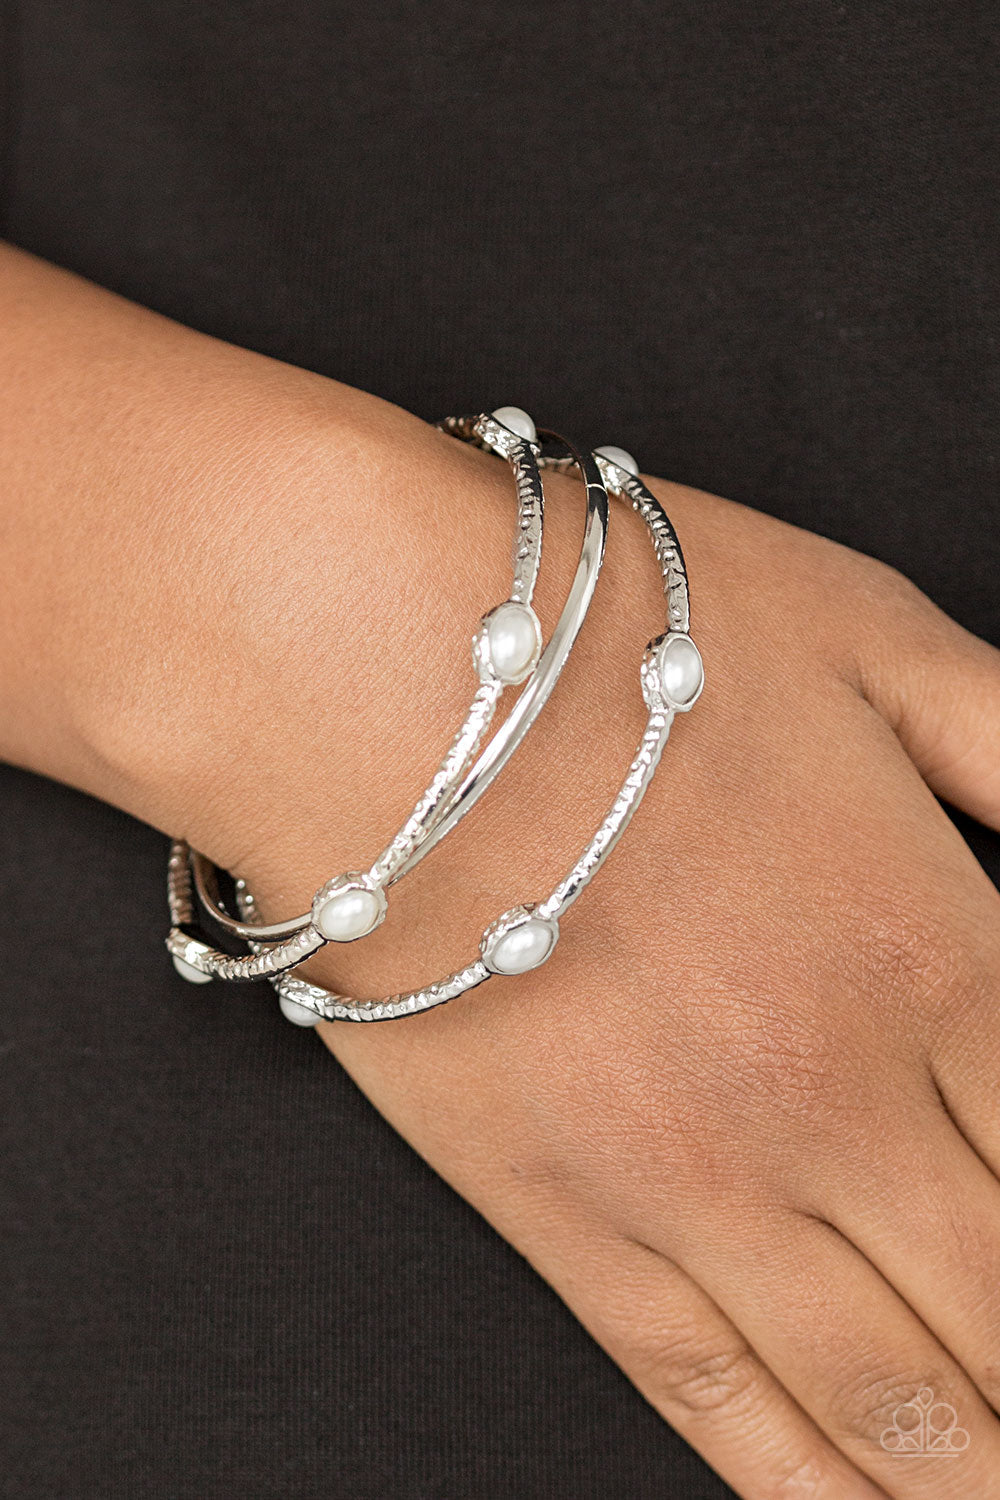 Paparazzi Bangle Belle - White Pearly Beads - Hammered in Shimmer - Set of 3 Bangle Bracelets - $5 Jewelry with Ashley Swint